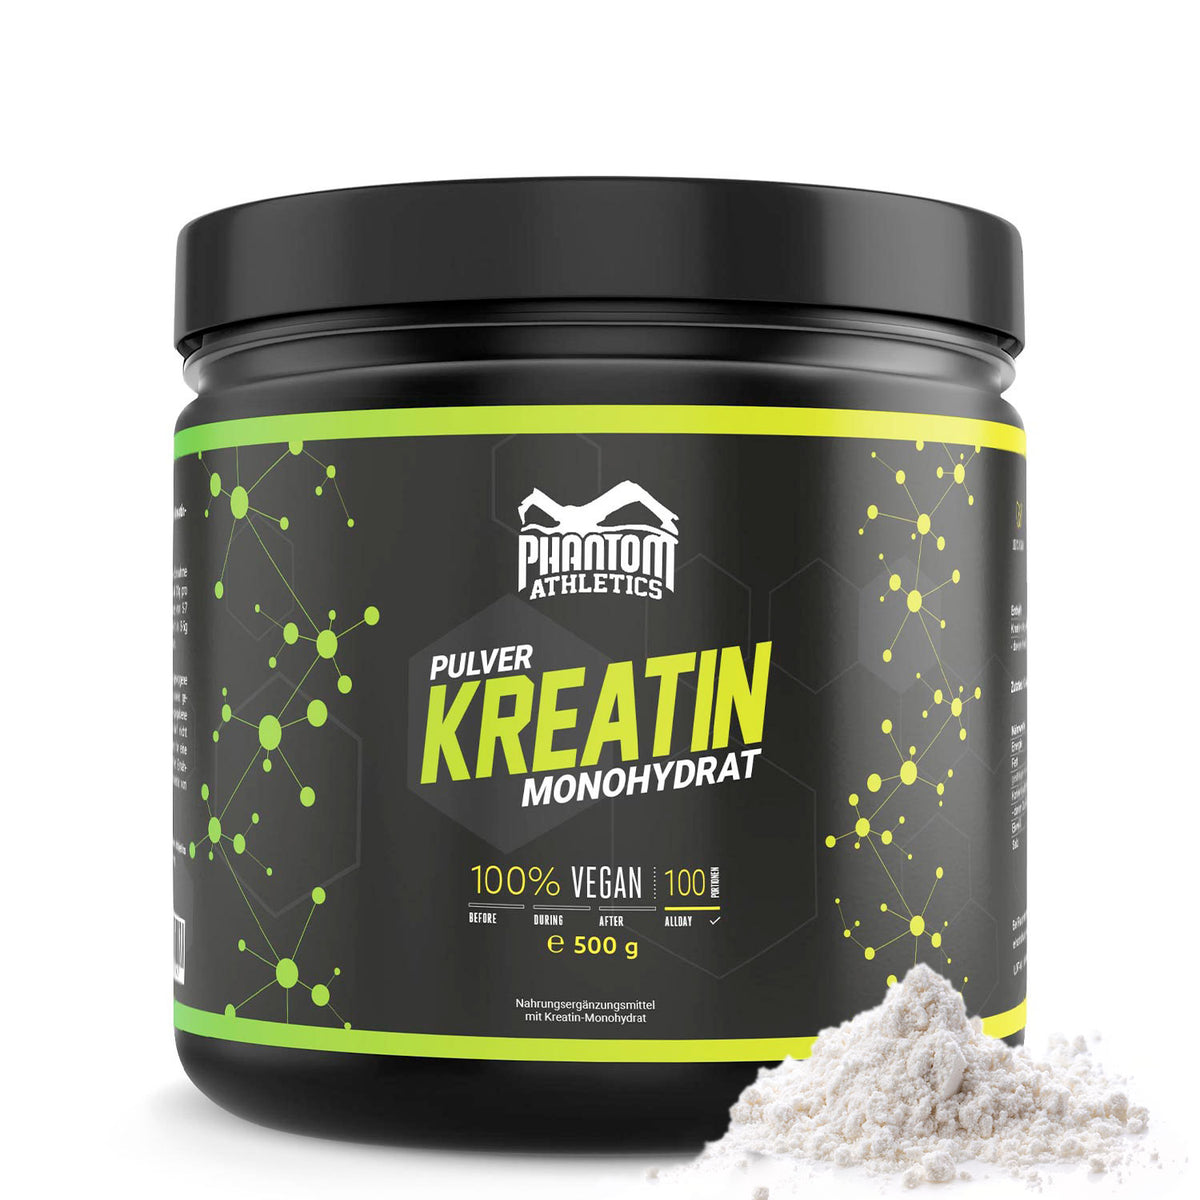 Phantom creatine monohydrate powder for more power and energy in martial arts.